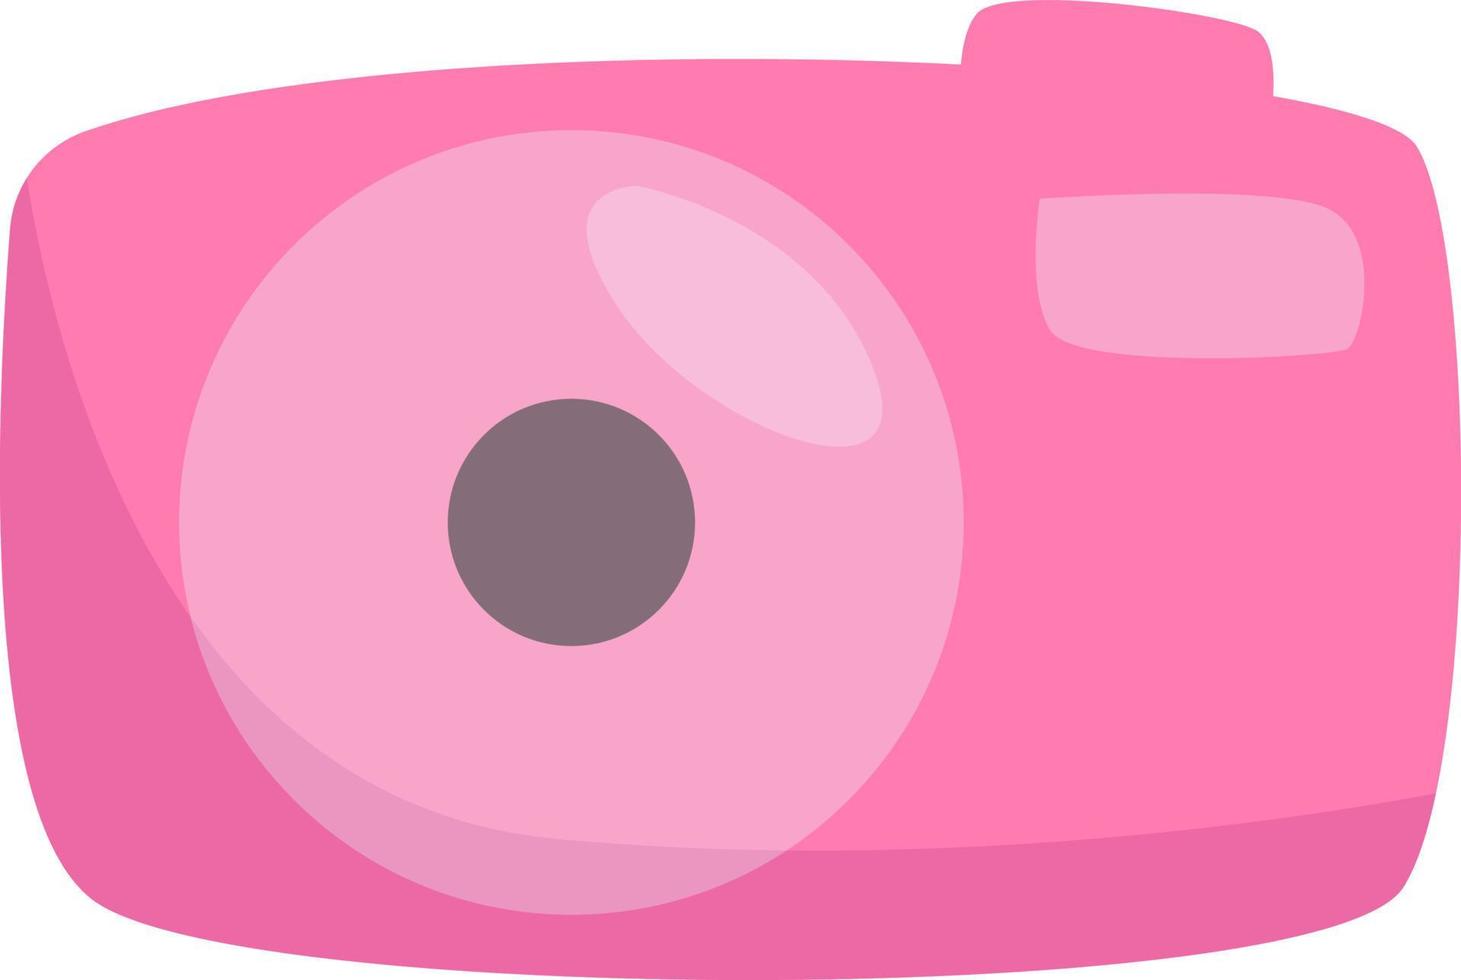 Vacation camera, icon, vector on white background.